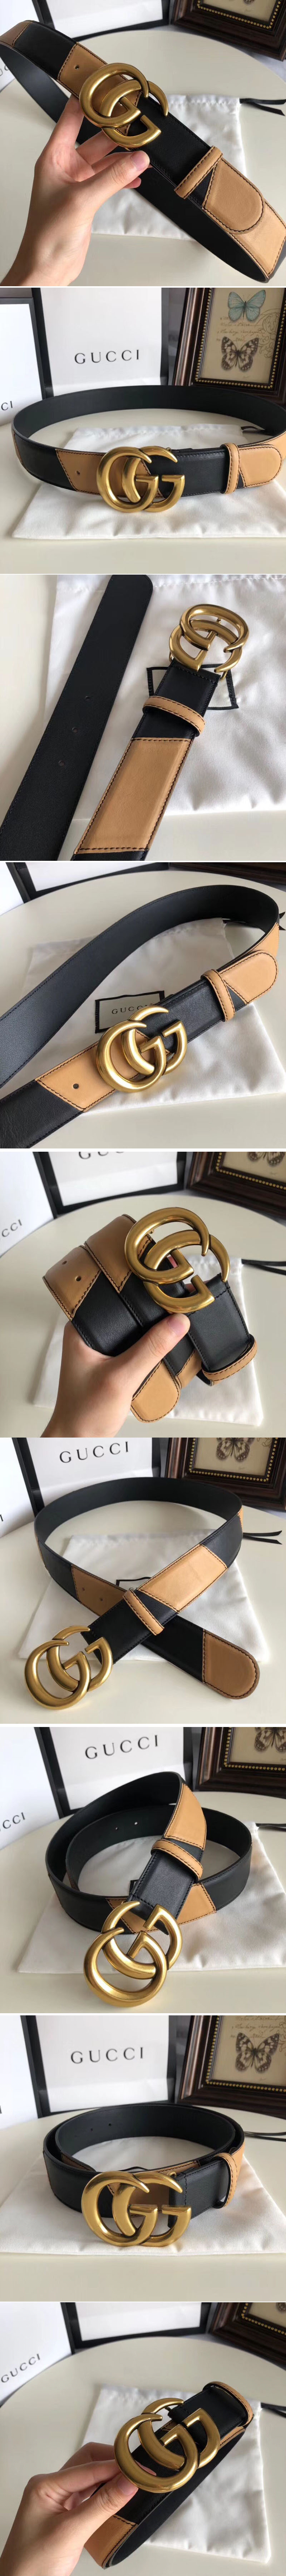 Replica Gucci 582348 40cm Leather belt with Double G buckle Black and Tan Leather